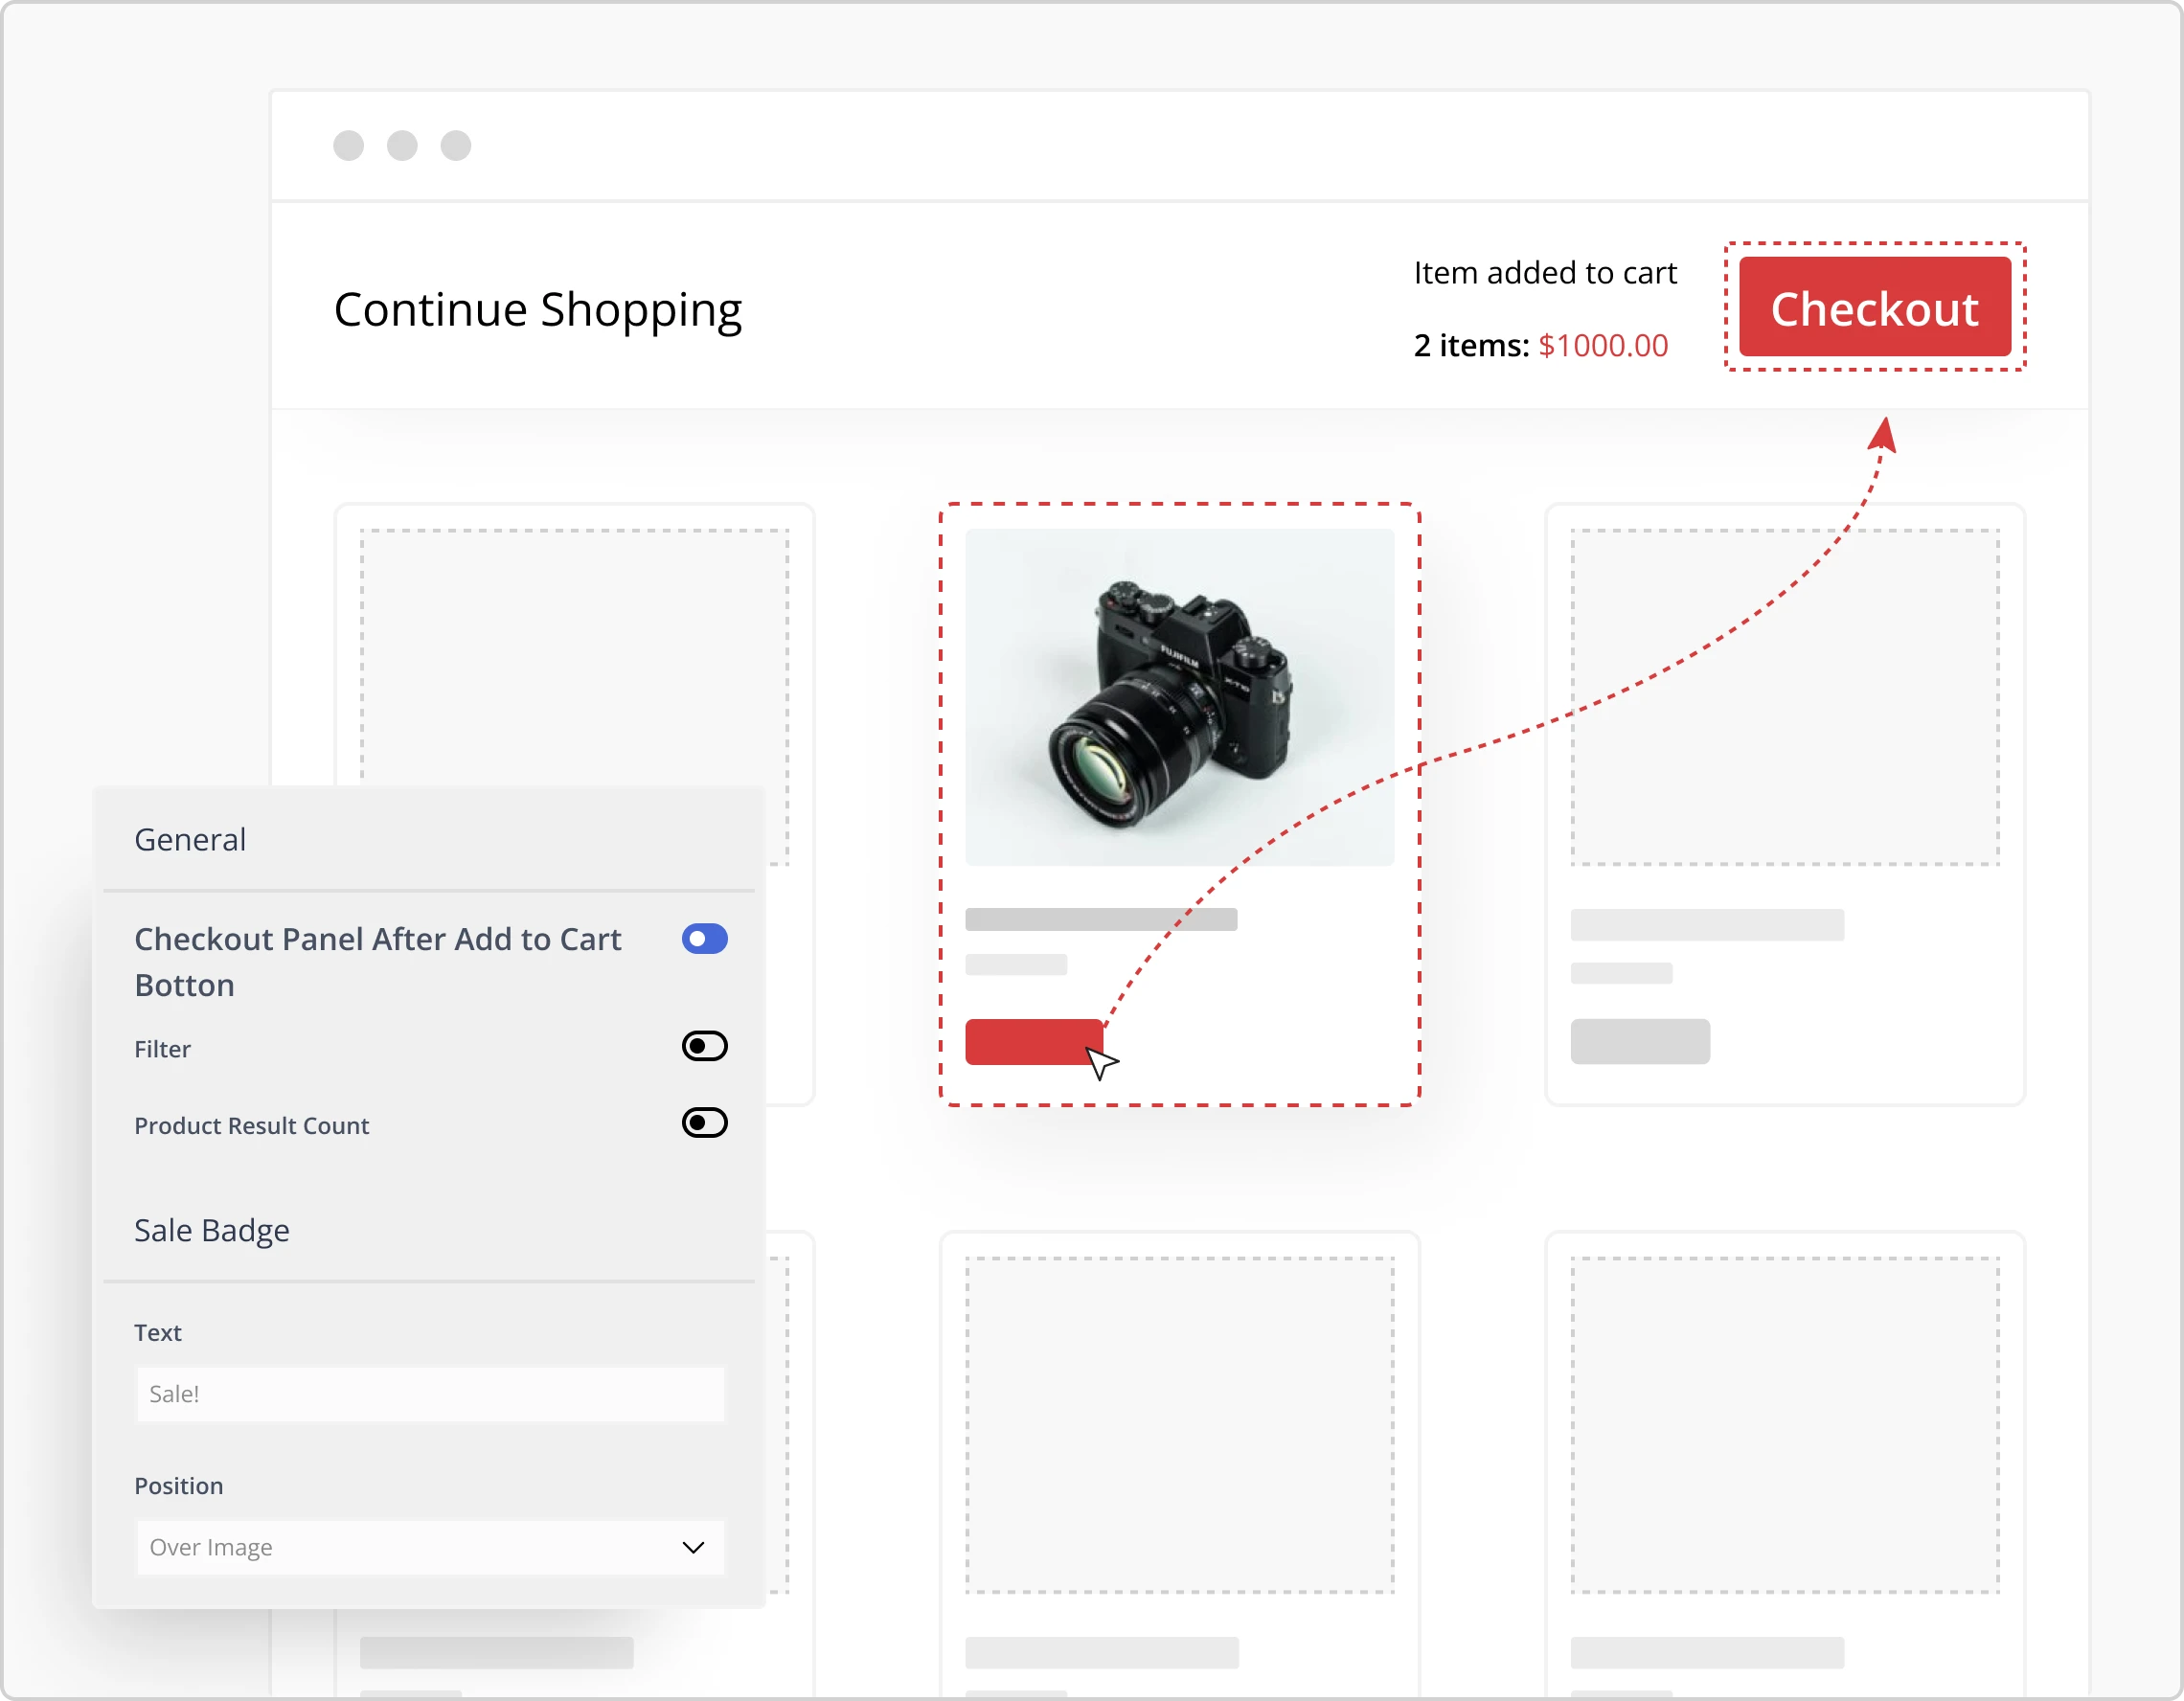 Checkout Panel After Add to Cart - Zakra Theme WooCommerce Feature